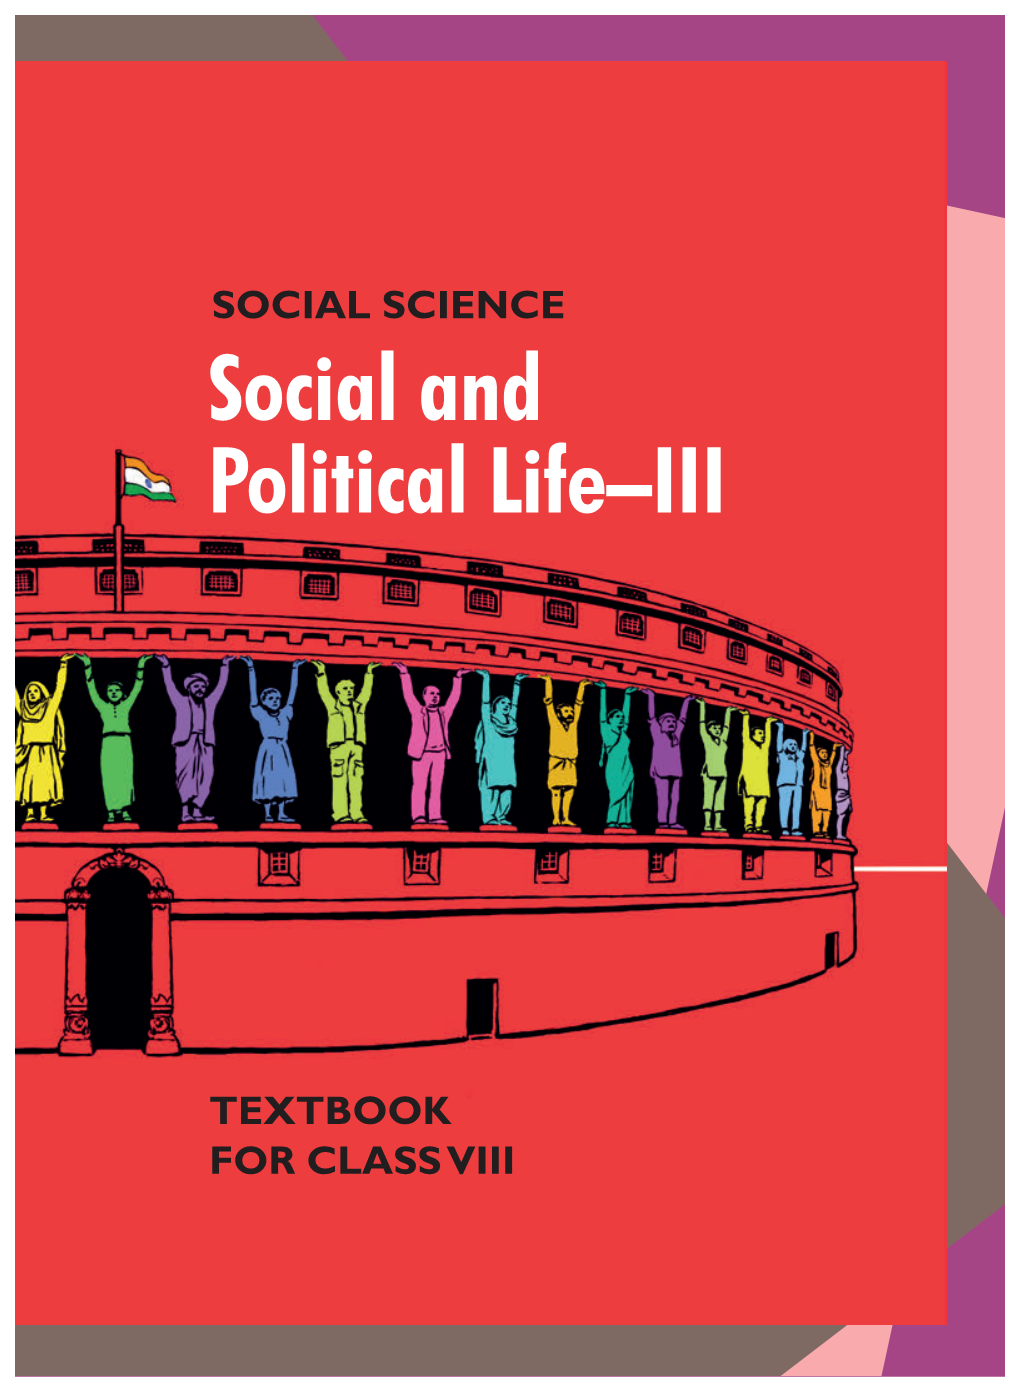 Political Science for Class VIII in the Development of This Textbook